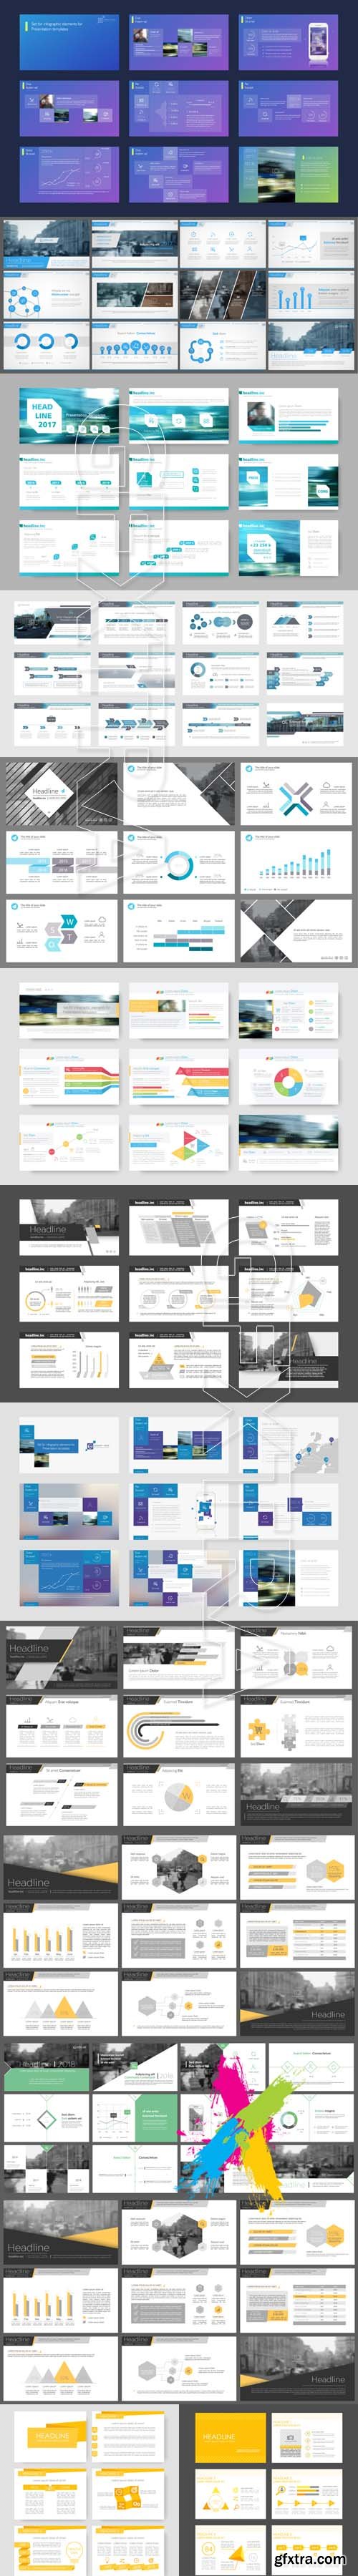 Infographic elements for presentation template vector